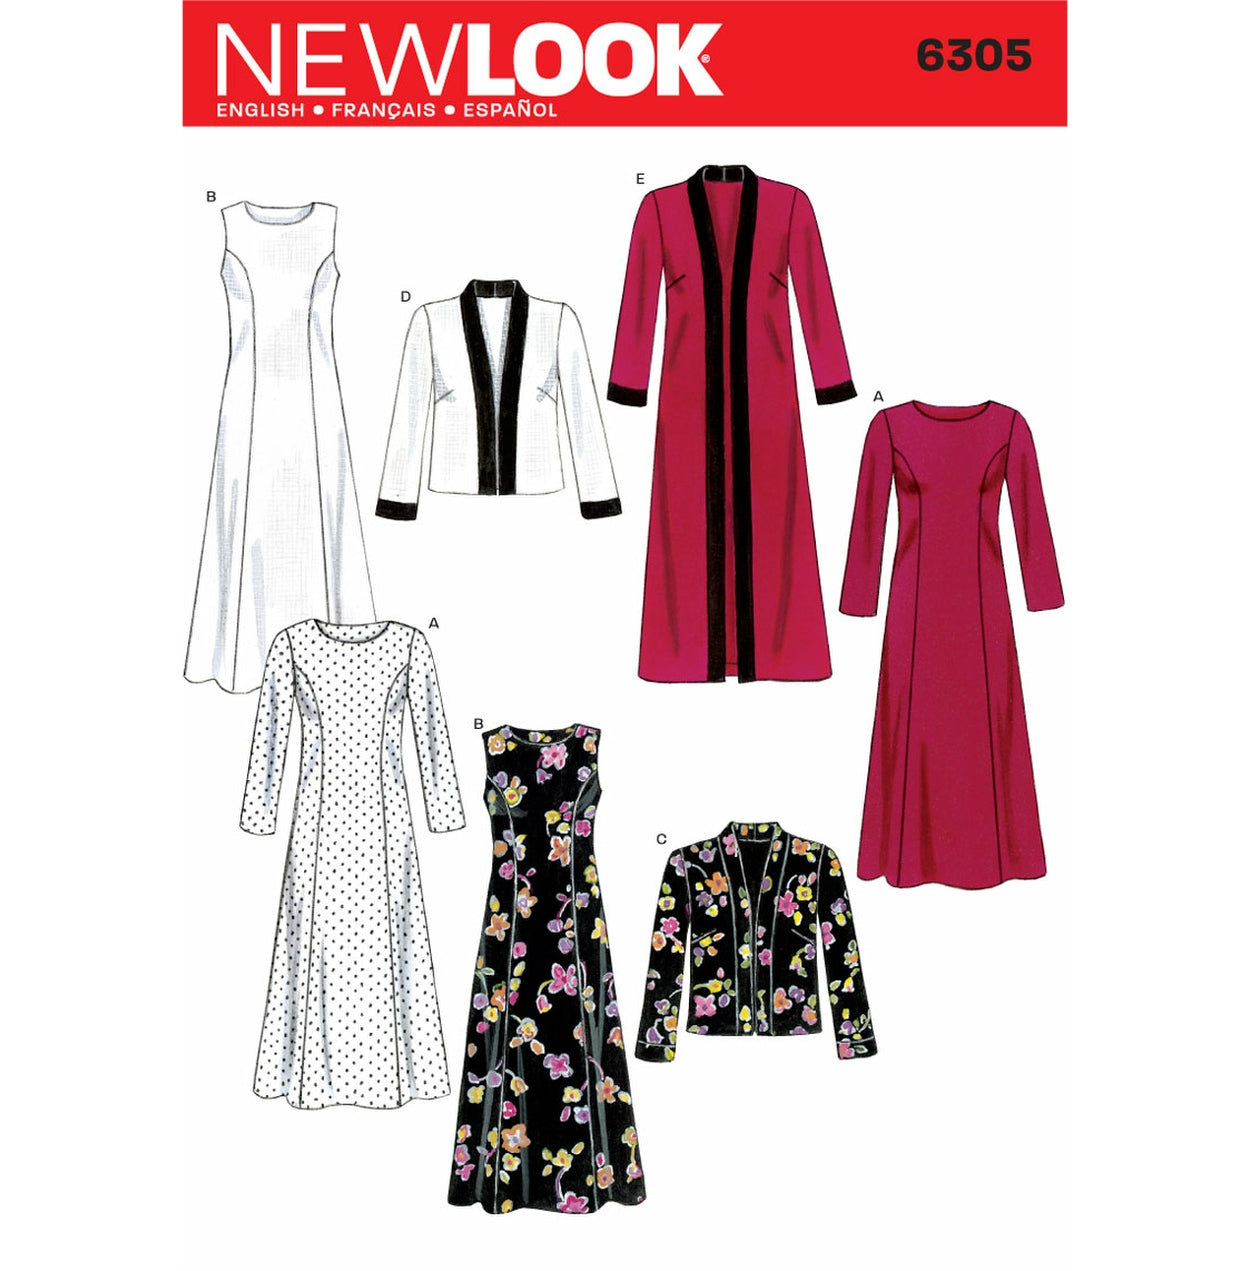 NL6305 Misses Dress and jacket pattern from Jaycotts Sewing Supplies